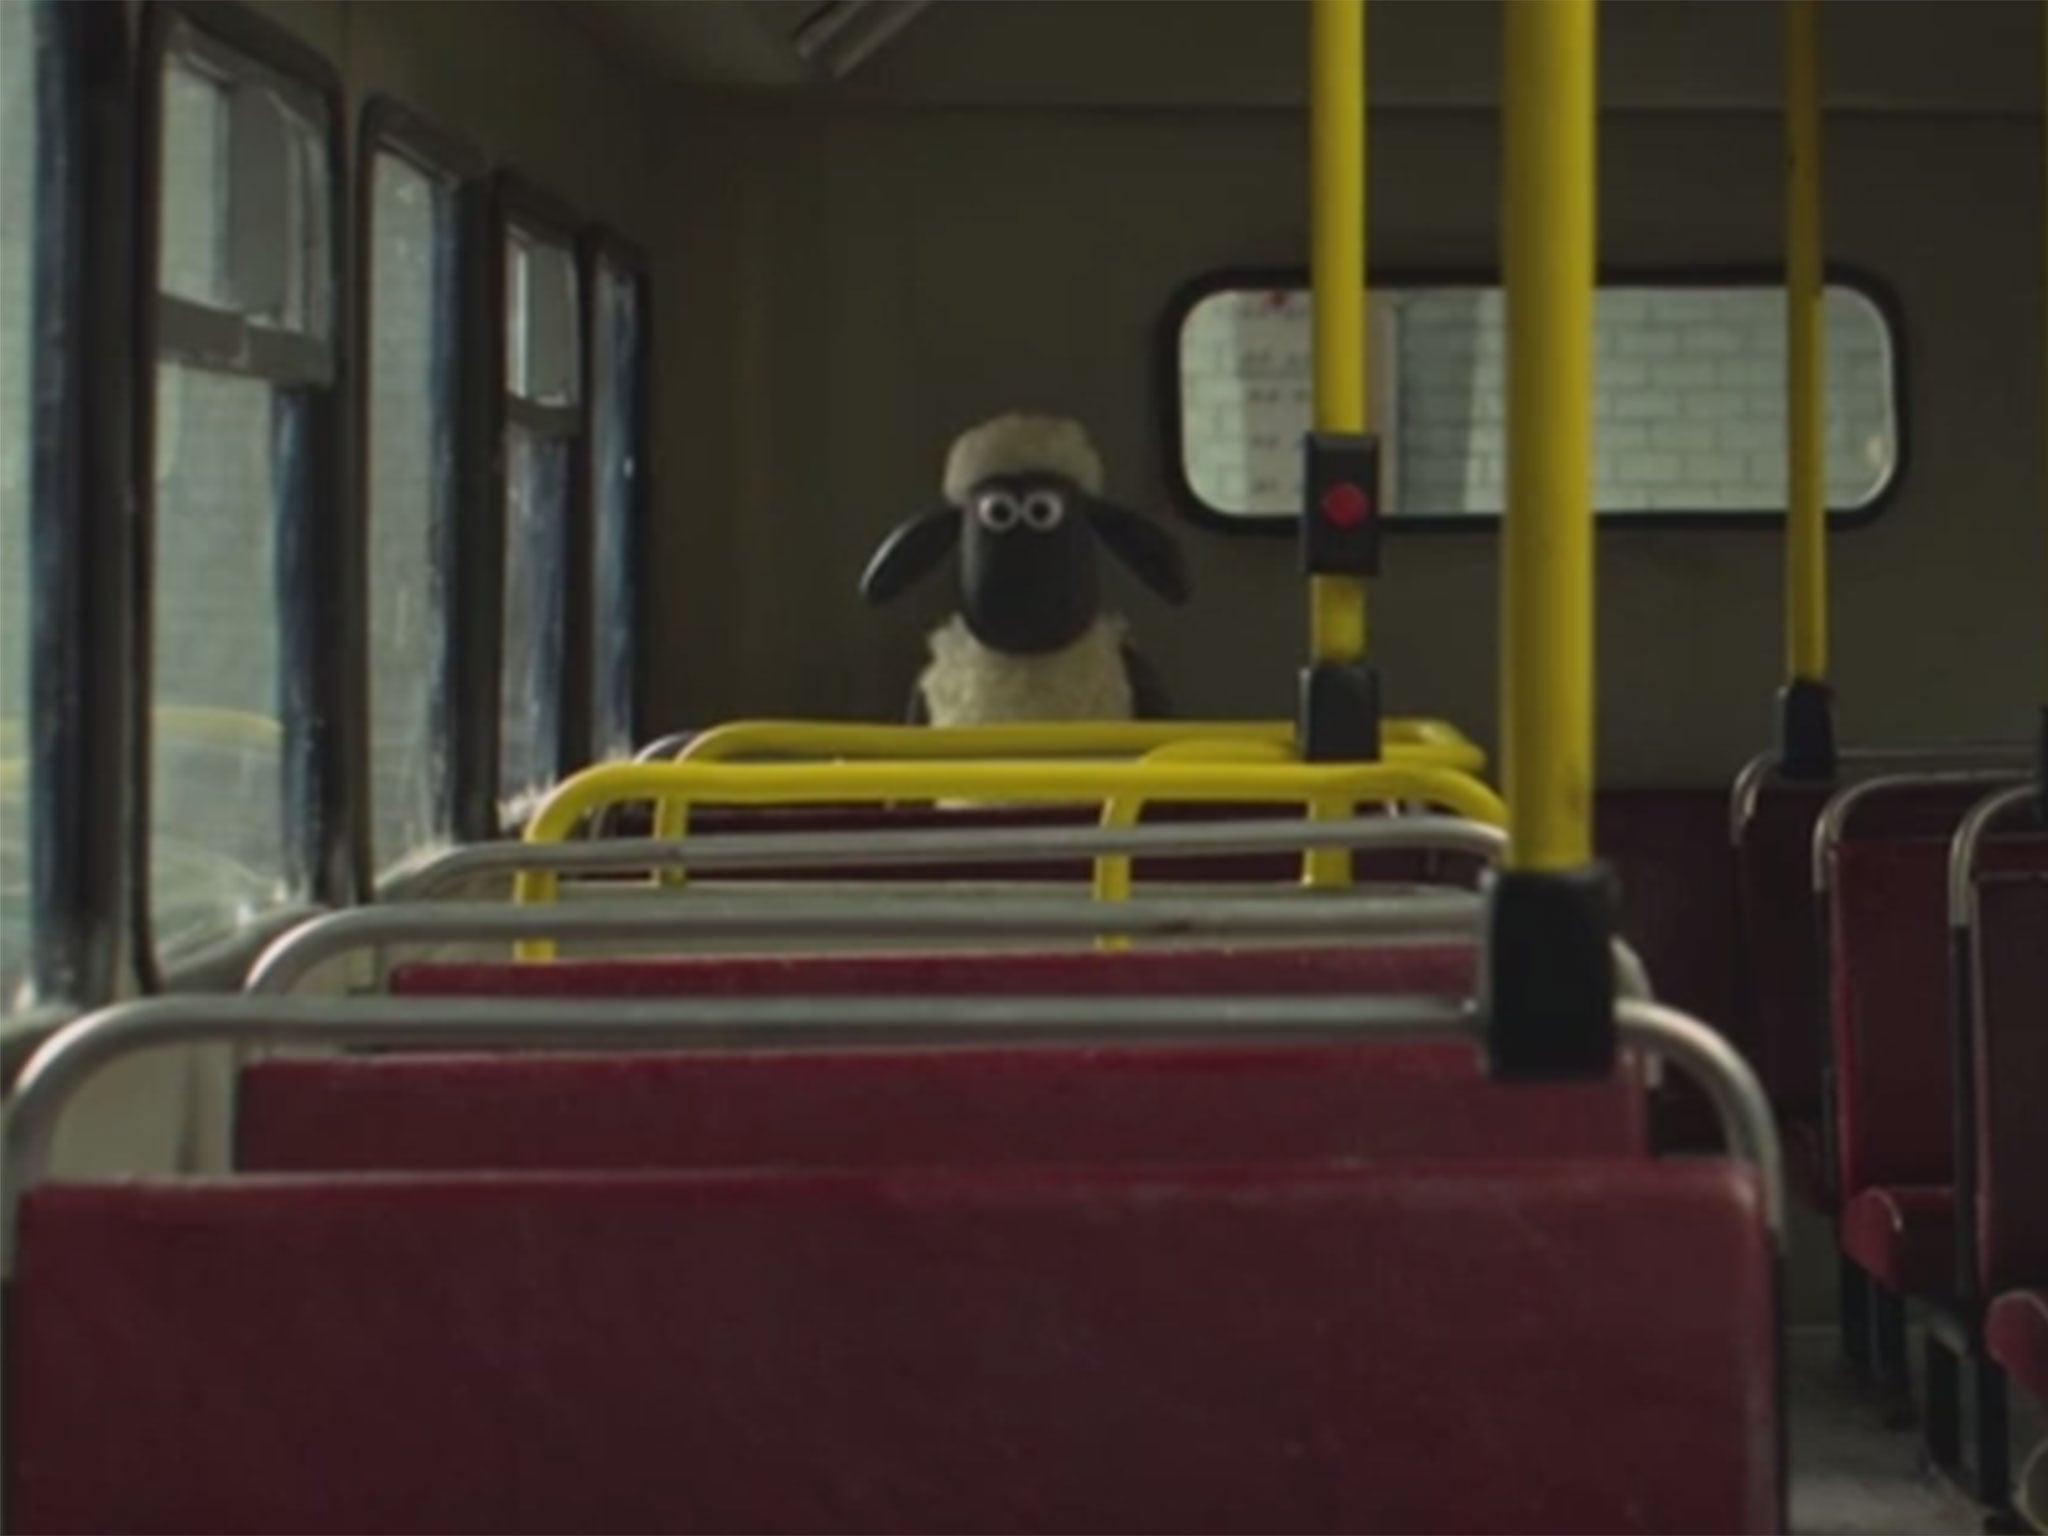 Shaun the Sheep boards a bus to the "Big City"